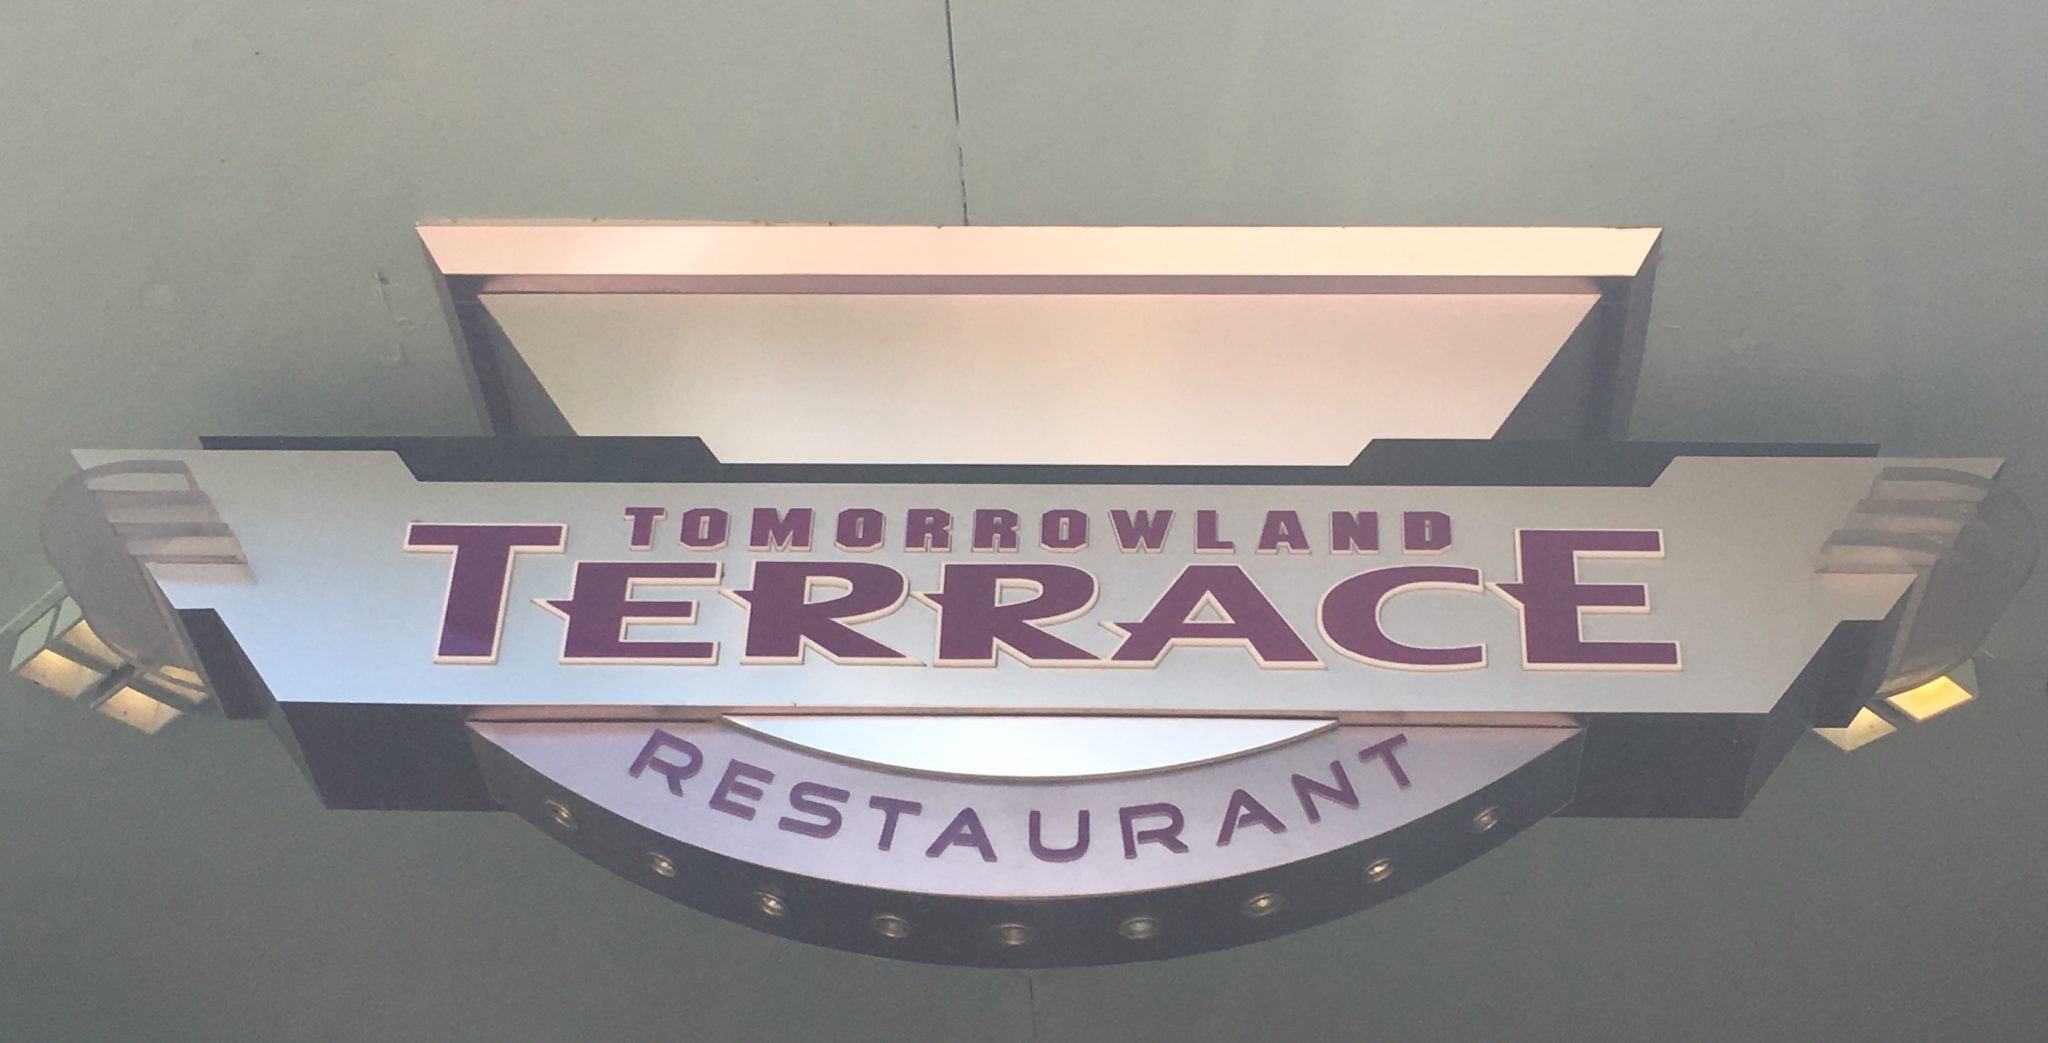 Tomorrowland Terrace New Lunch and Dinner Menu